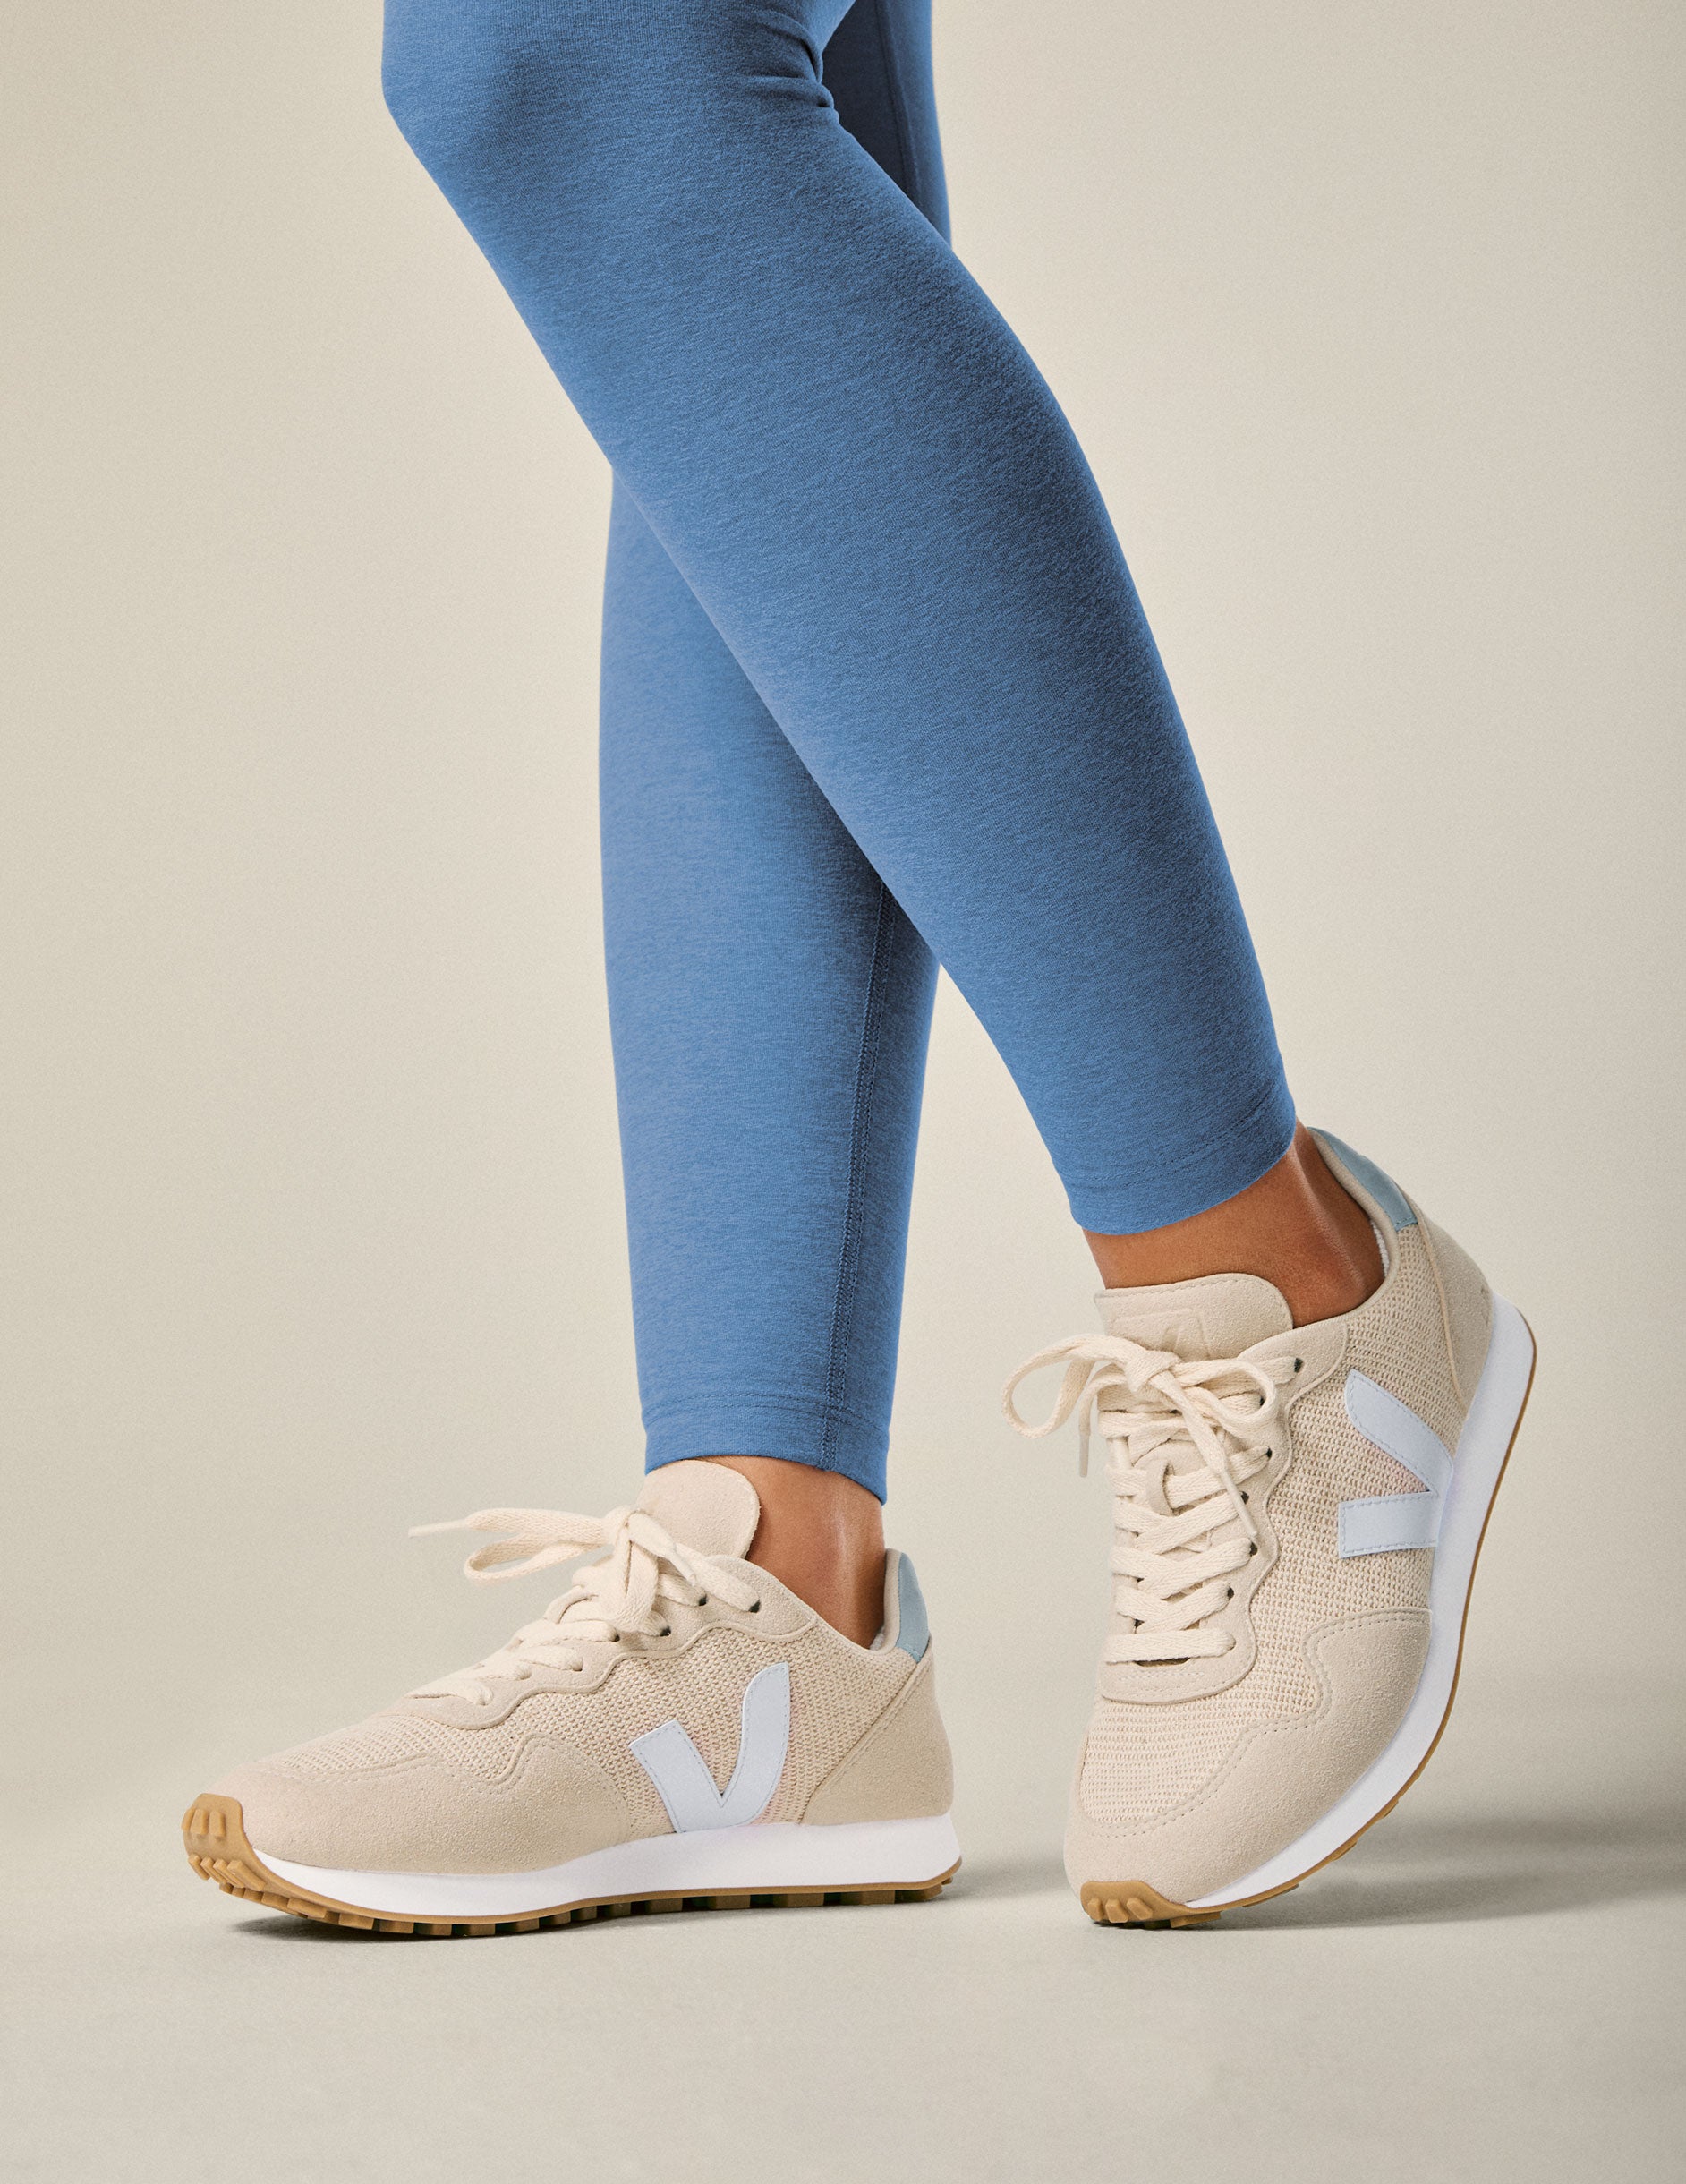 cream and blue lace up Veja SDU sneakers. made in Brazil.